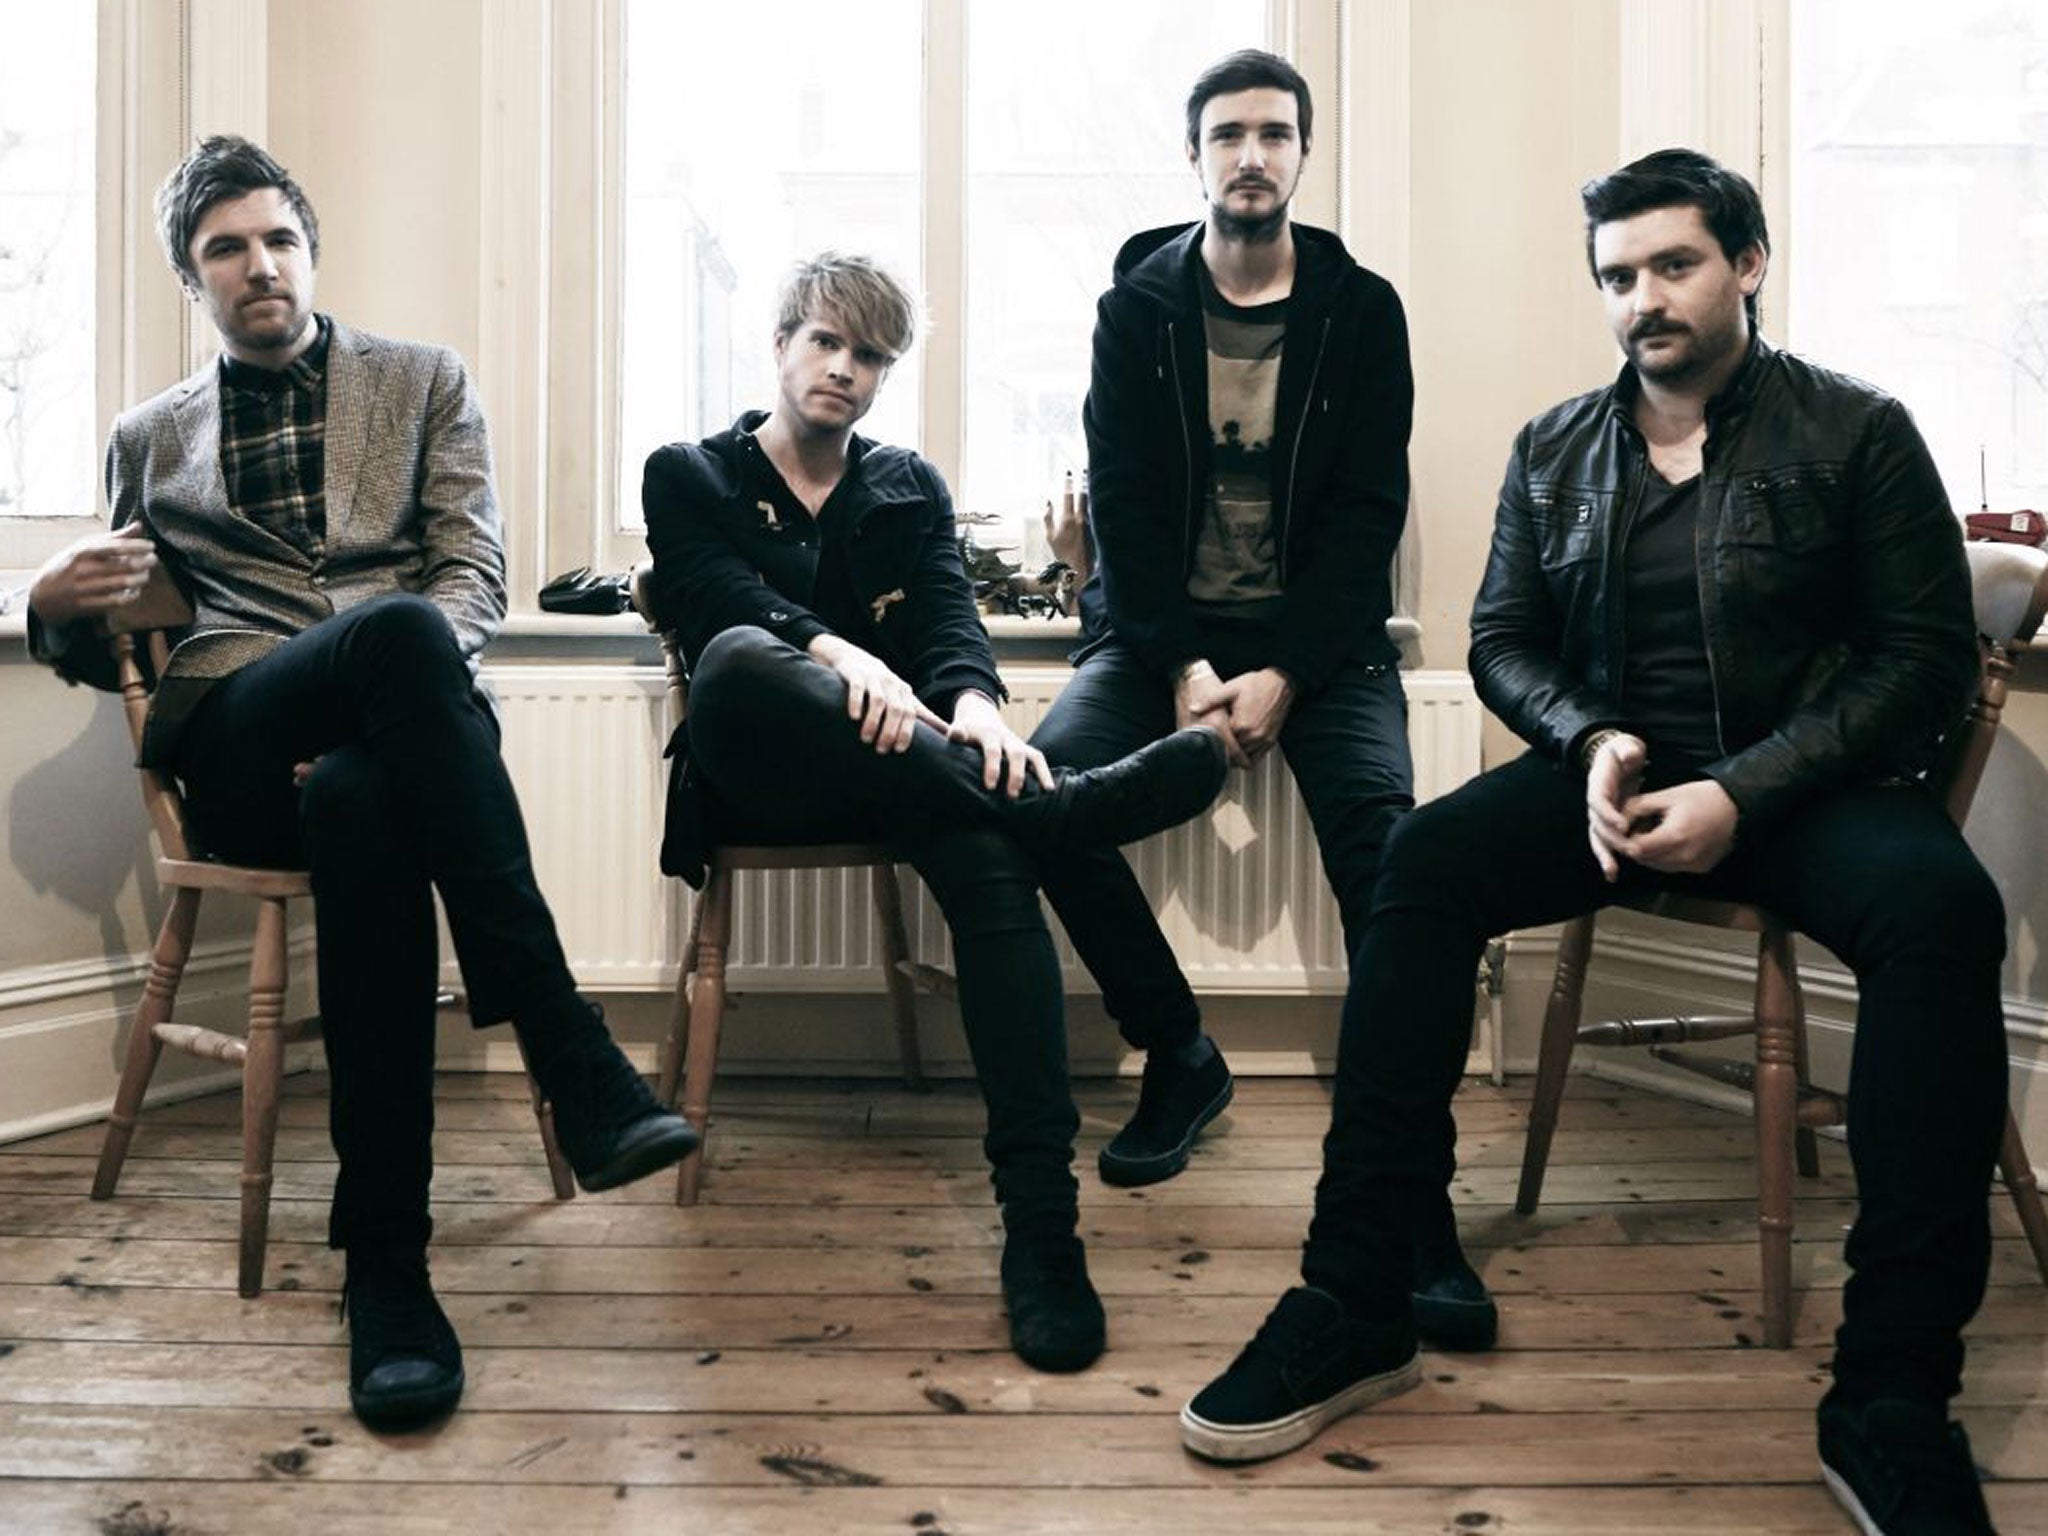 In the hot seats: (left to right) Mark Prendergast, Steve Garrigan, Jay Boland and Vinny May of Kodaline